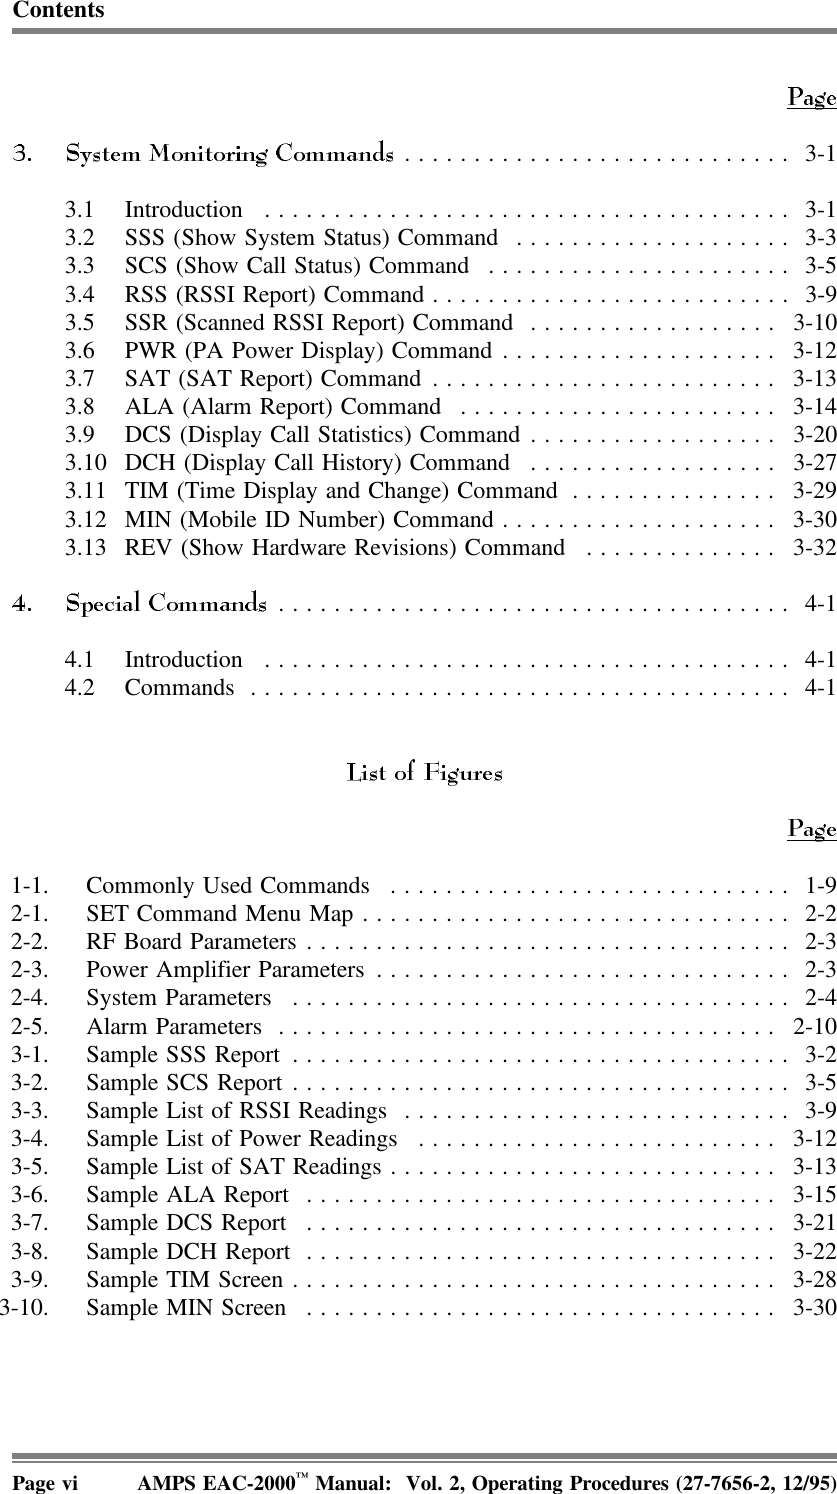 Contents............................ 3-13.1 Introduction ...................................... 3-13.2 SSS (Show System Status) Command .................... 3-33.3 SCS (Show Call Status) Command ...................... 3-53.4 RSS (RSSI Report) Command.......................... 3-93.5 SSR (Scanned RSSI Report) Command .................. 3-103.6 PWR (PA Power Display) Command.................... 3-123.7 SAT (SAT Report) Command......................... 3-133.8 ALA (Alarm Report) Command ....................... 3-143.9 DCS (Display Call Statistics) Command .................. 3-203.10 DCH (Display Call History) Command .................. 3-273.11 TIM (Time Display and Change) Command ............... 3-293.12 MIN (Mobile ID Number) Command .................... 3-303.13 REV (Show Hardware Revisions) Command .............. 3-32..................................... 4-14.1 Introduction ...................................... 4-14.2 Commands ....................................... 4-11-1. Commonly Used Commands ............................. 1-92-1. SET Command Menu Map............................... 2-22-2. RF Board Parameters ................................... 2-32-3. Power Amplifier Parameters .............................. 2-32-4. System Parameters .................................... 2-42-5. Alarm Parameters .................................... 2-103-1. Sample SSS Report .................................... 3-23-2. Sample SCS Report.................................... 3-53-3. Sample List of RSSI Readings ............................ 3-93-4. Sample List of Power Readings .......................... 3-123-5. Sample List of SAT Readings............................ 3-133-6. Sample ALA Report .................................. 3-153-7. Sample DCS Report .................................. 3-213-8. Sample DCH Report .................................. 3-223-9. Sample TIM Screen................................... 3-283-10. Sample MIN Screen .................................. 3-30Page vi AMPS EAC-2000™ Manual:  Vol. 2, Operating Procedures (27-7656-2, 12/95)